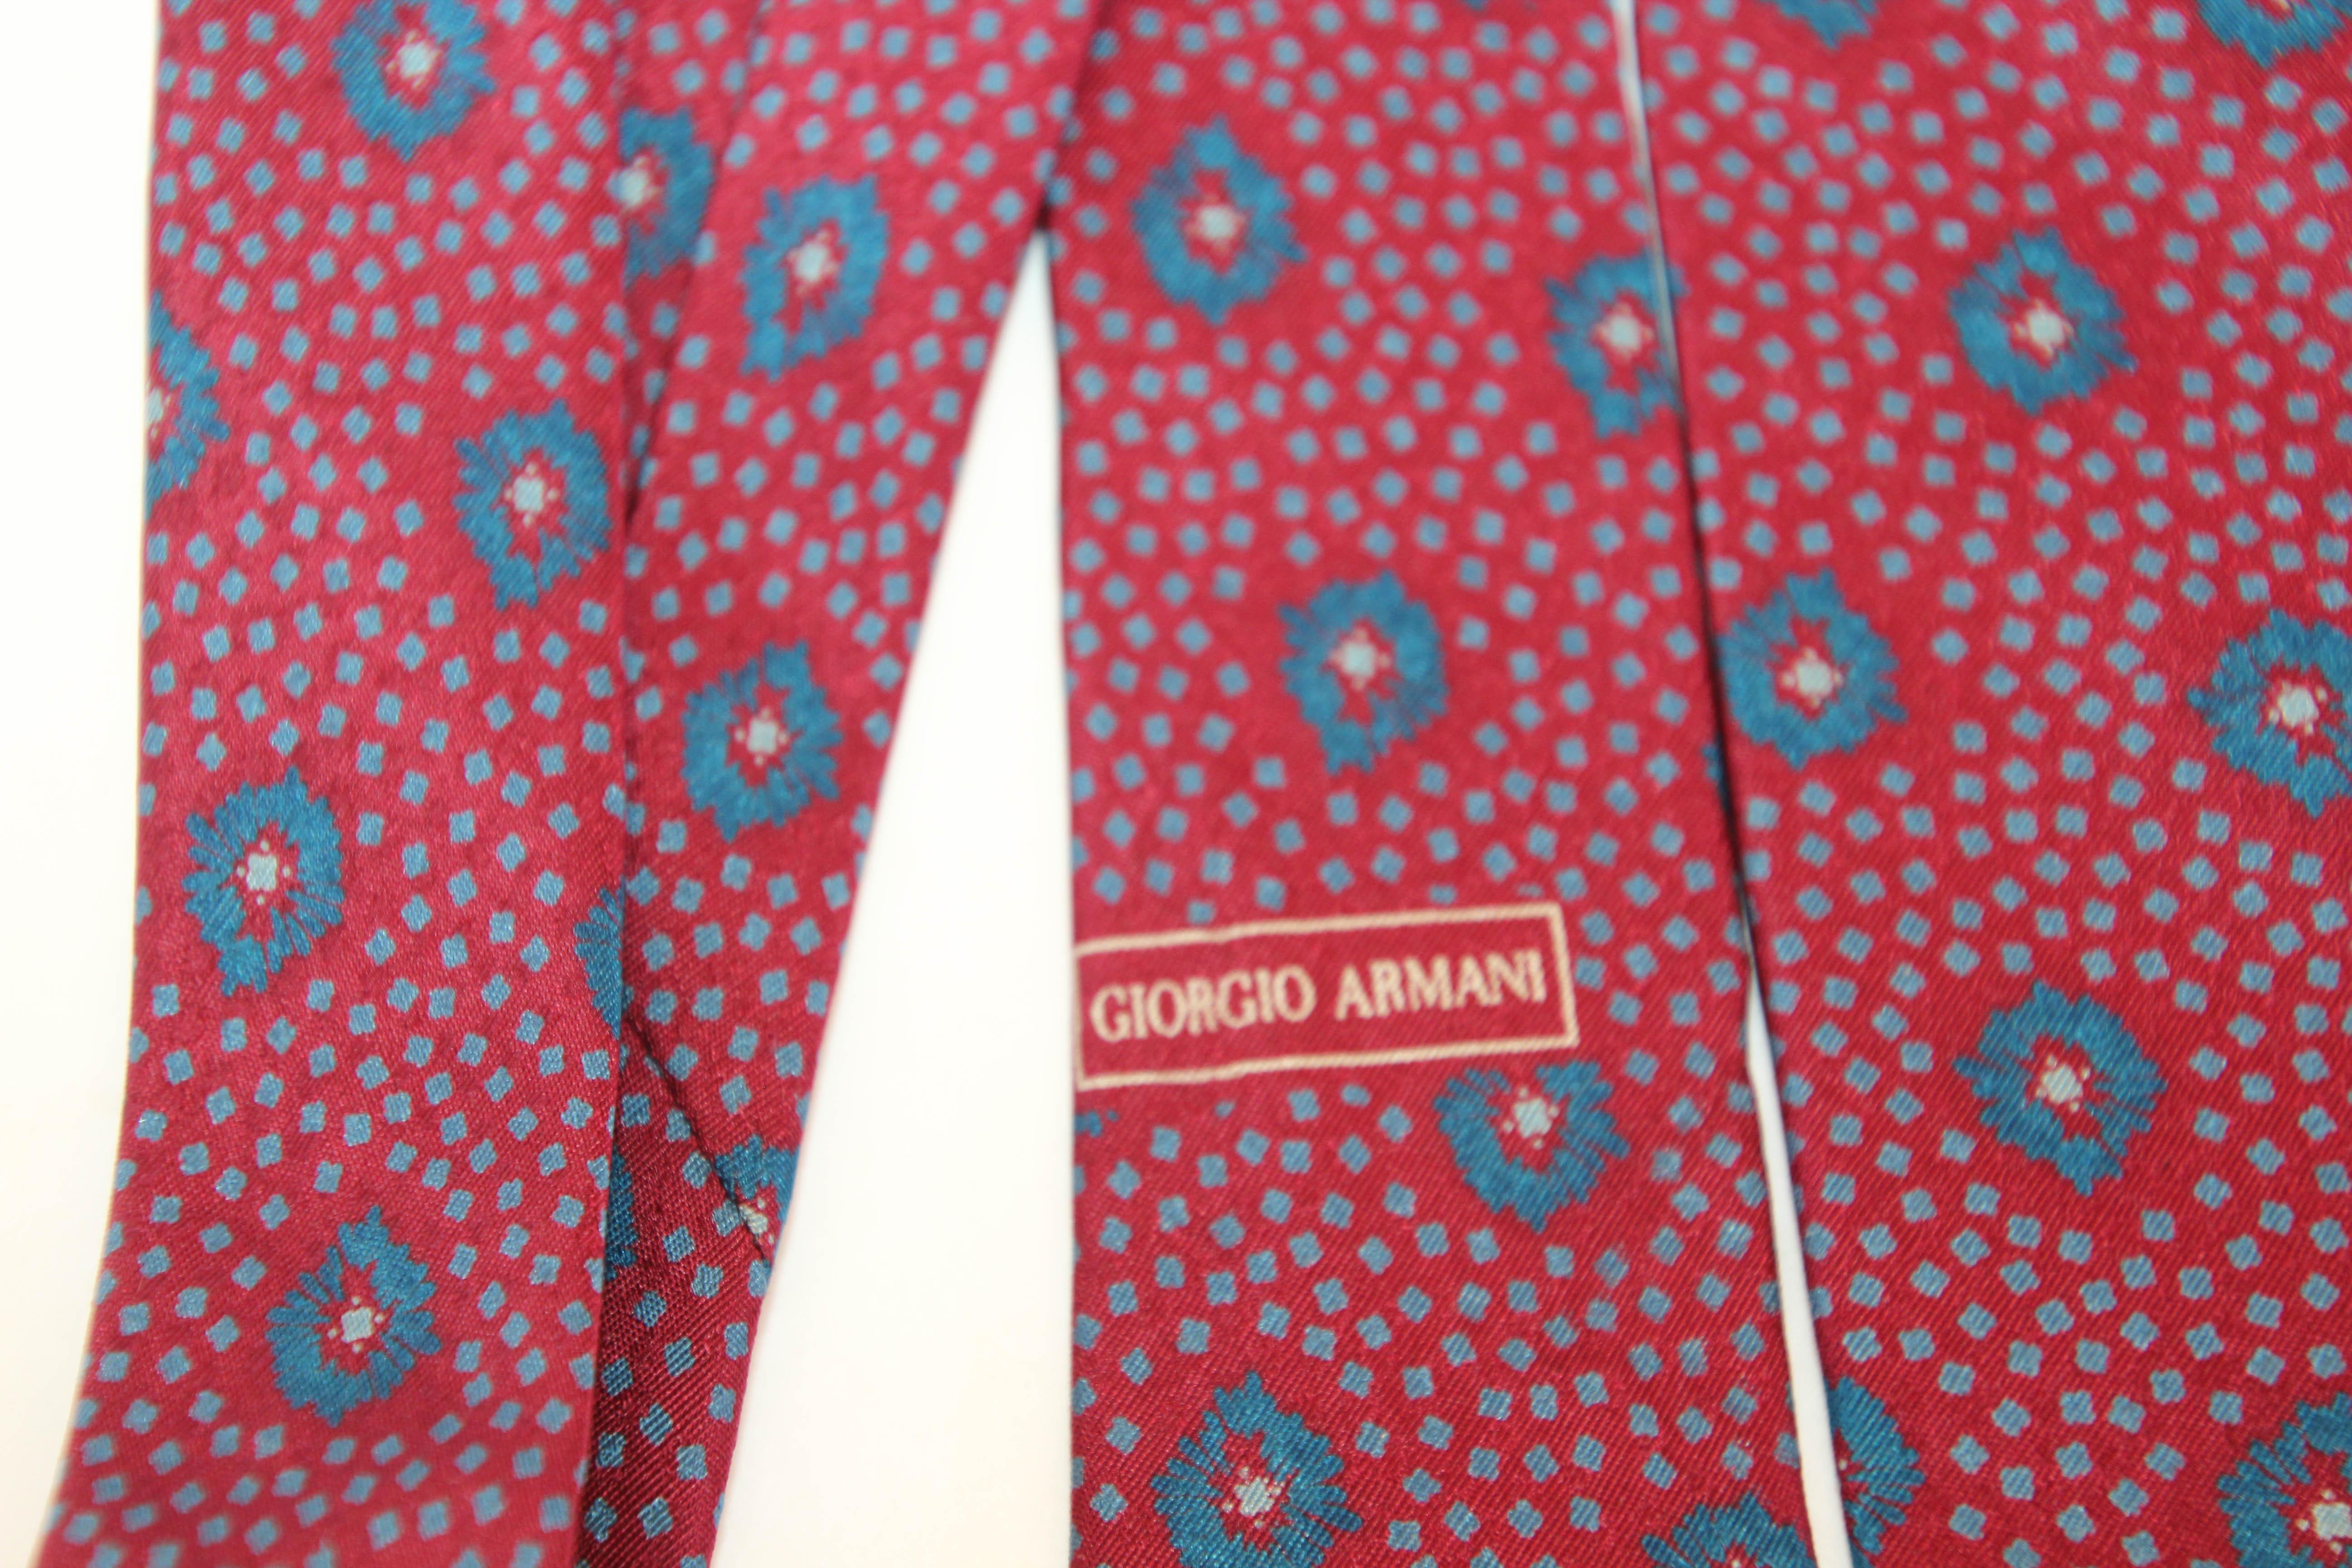 GIORGIO ARMANI Abstract Silk Tie Made in Italy In Good Condition For Sale In North Hollywood, CA